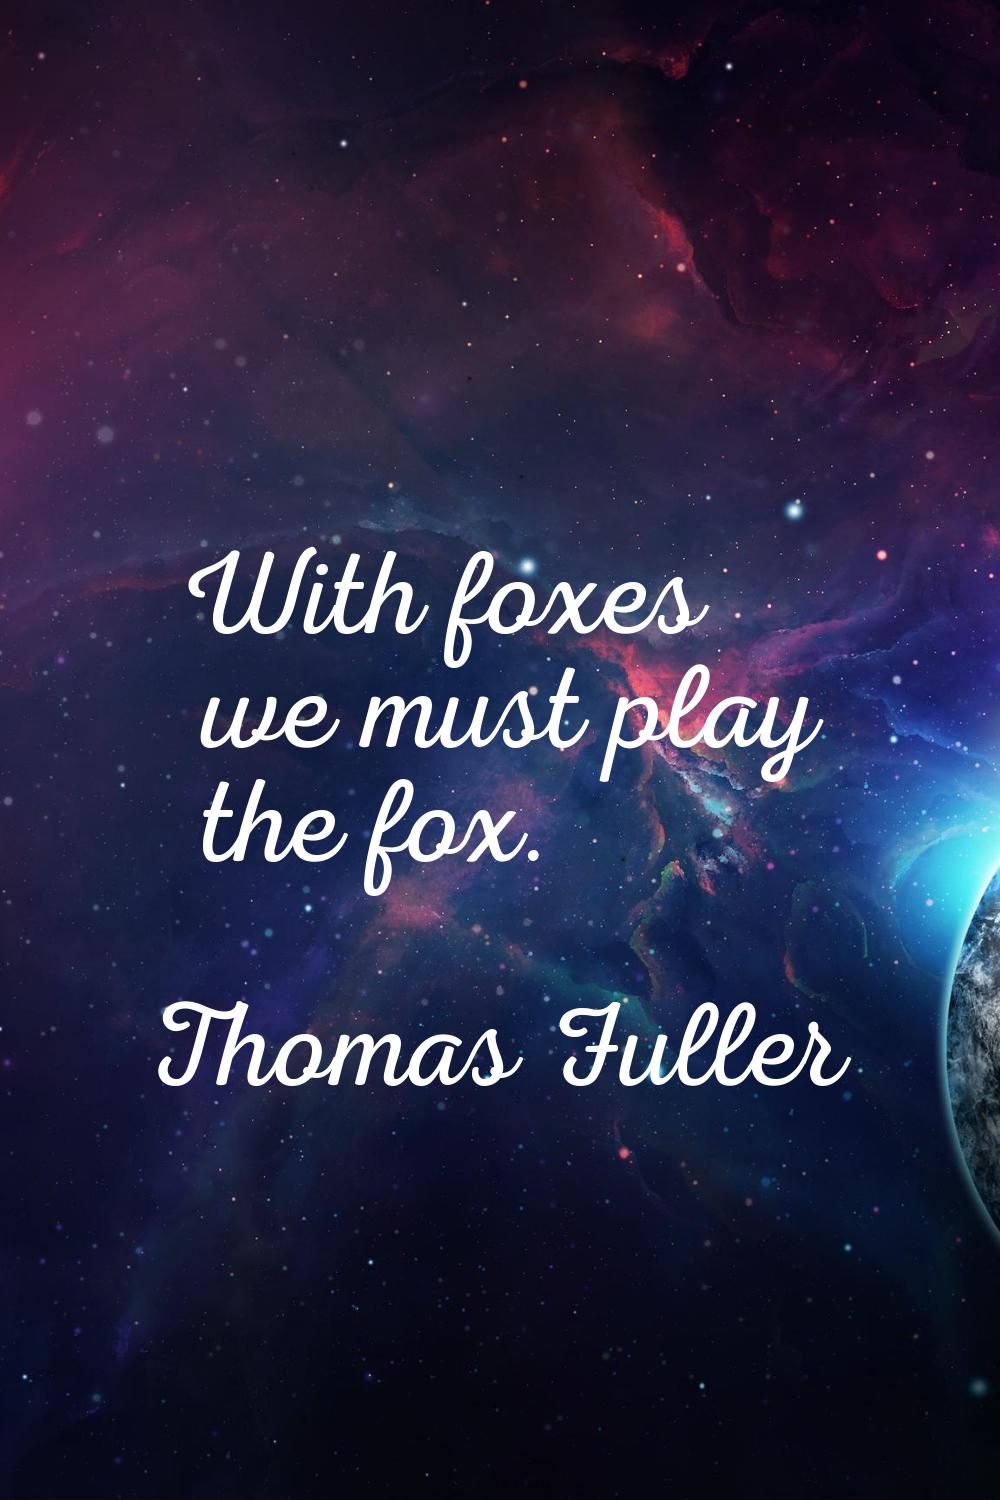 With foxes we must play the fox.